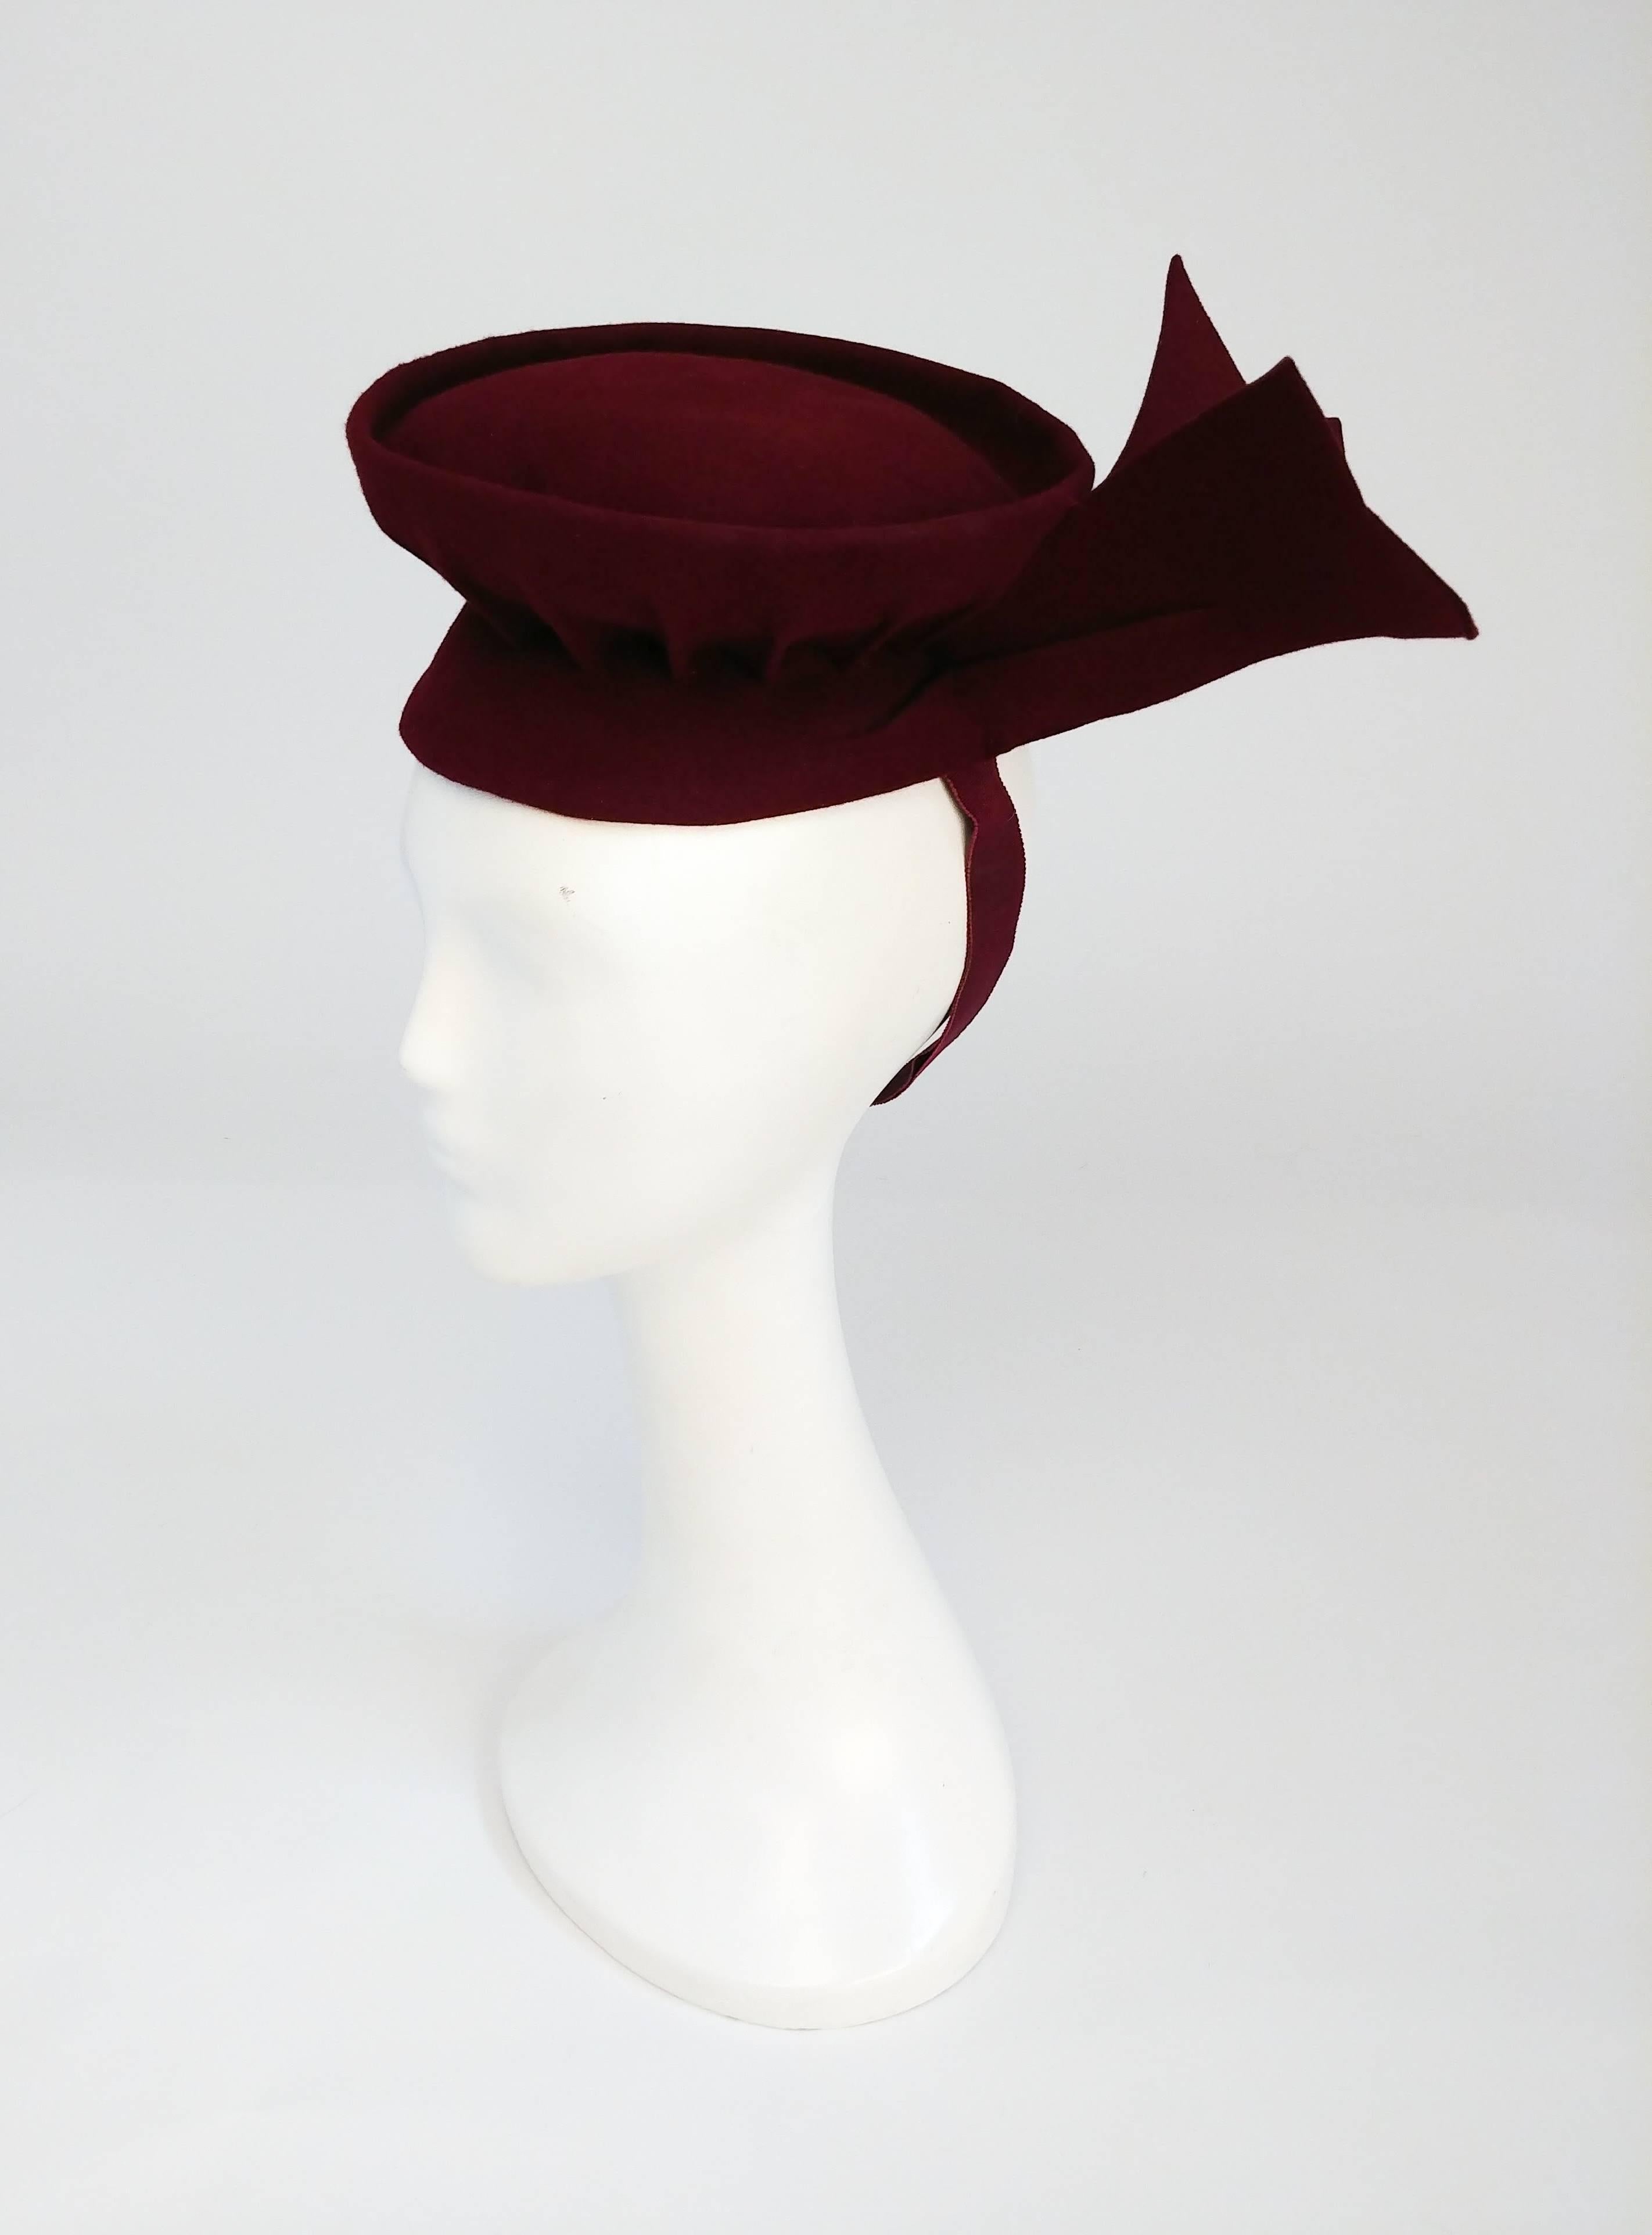 1940s Burgundy Felt Toy Hat. Burgundy wool felt toy hat with winged accents on the side and elasticated band.